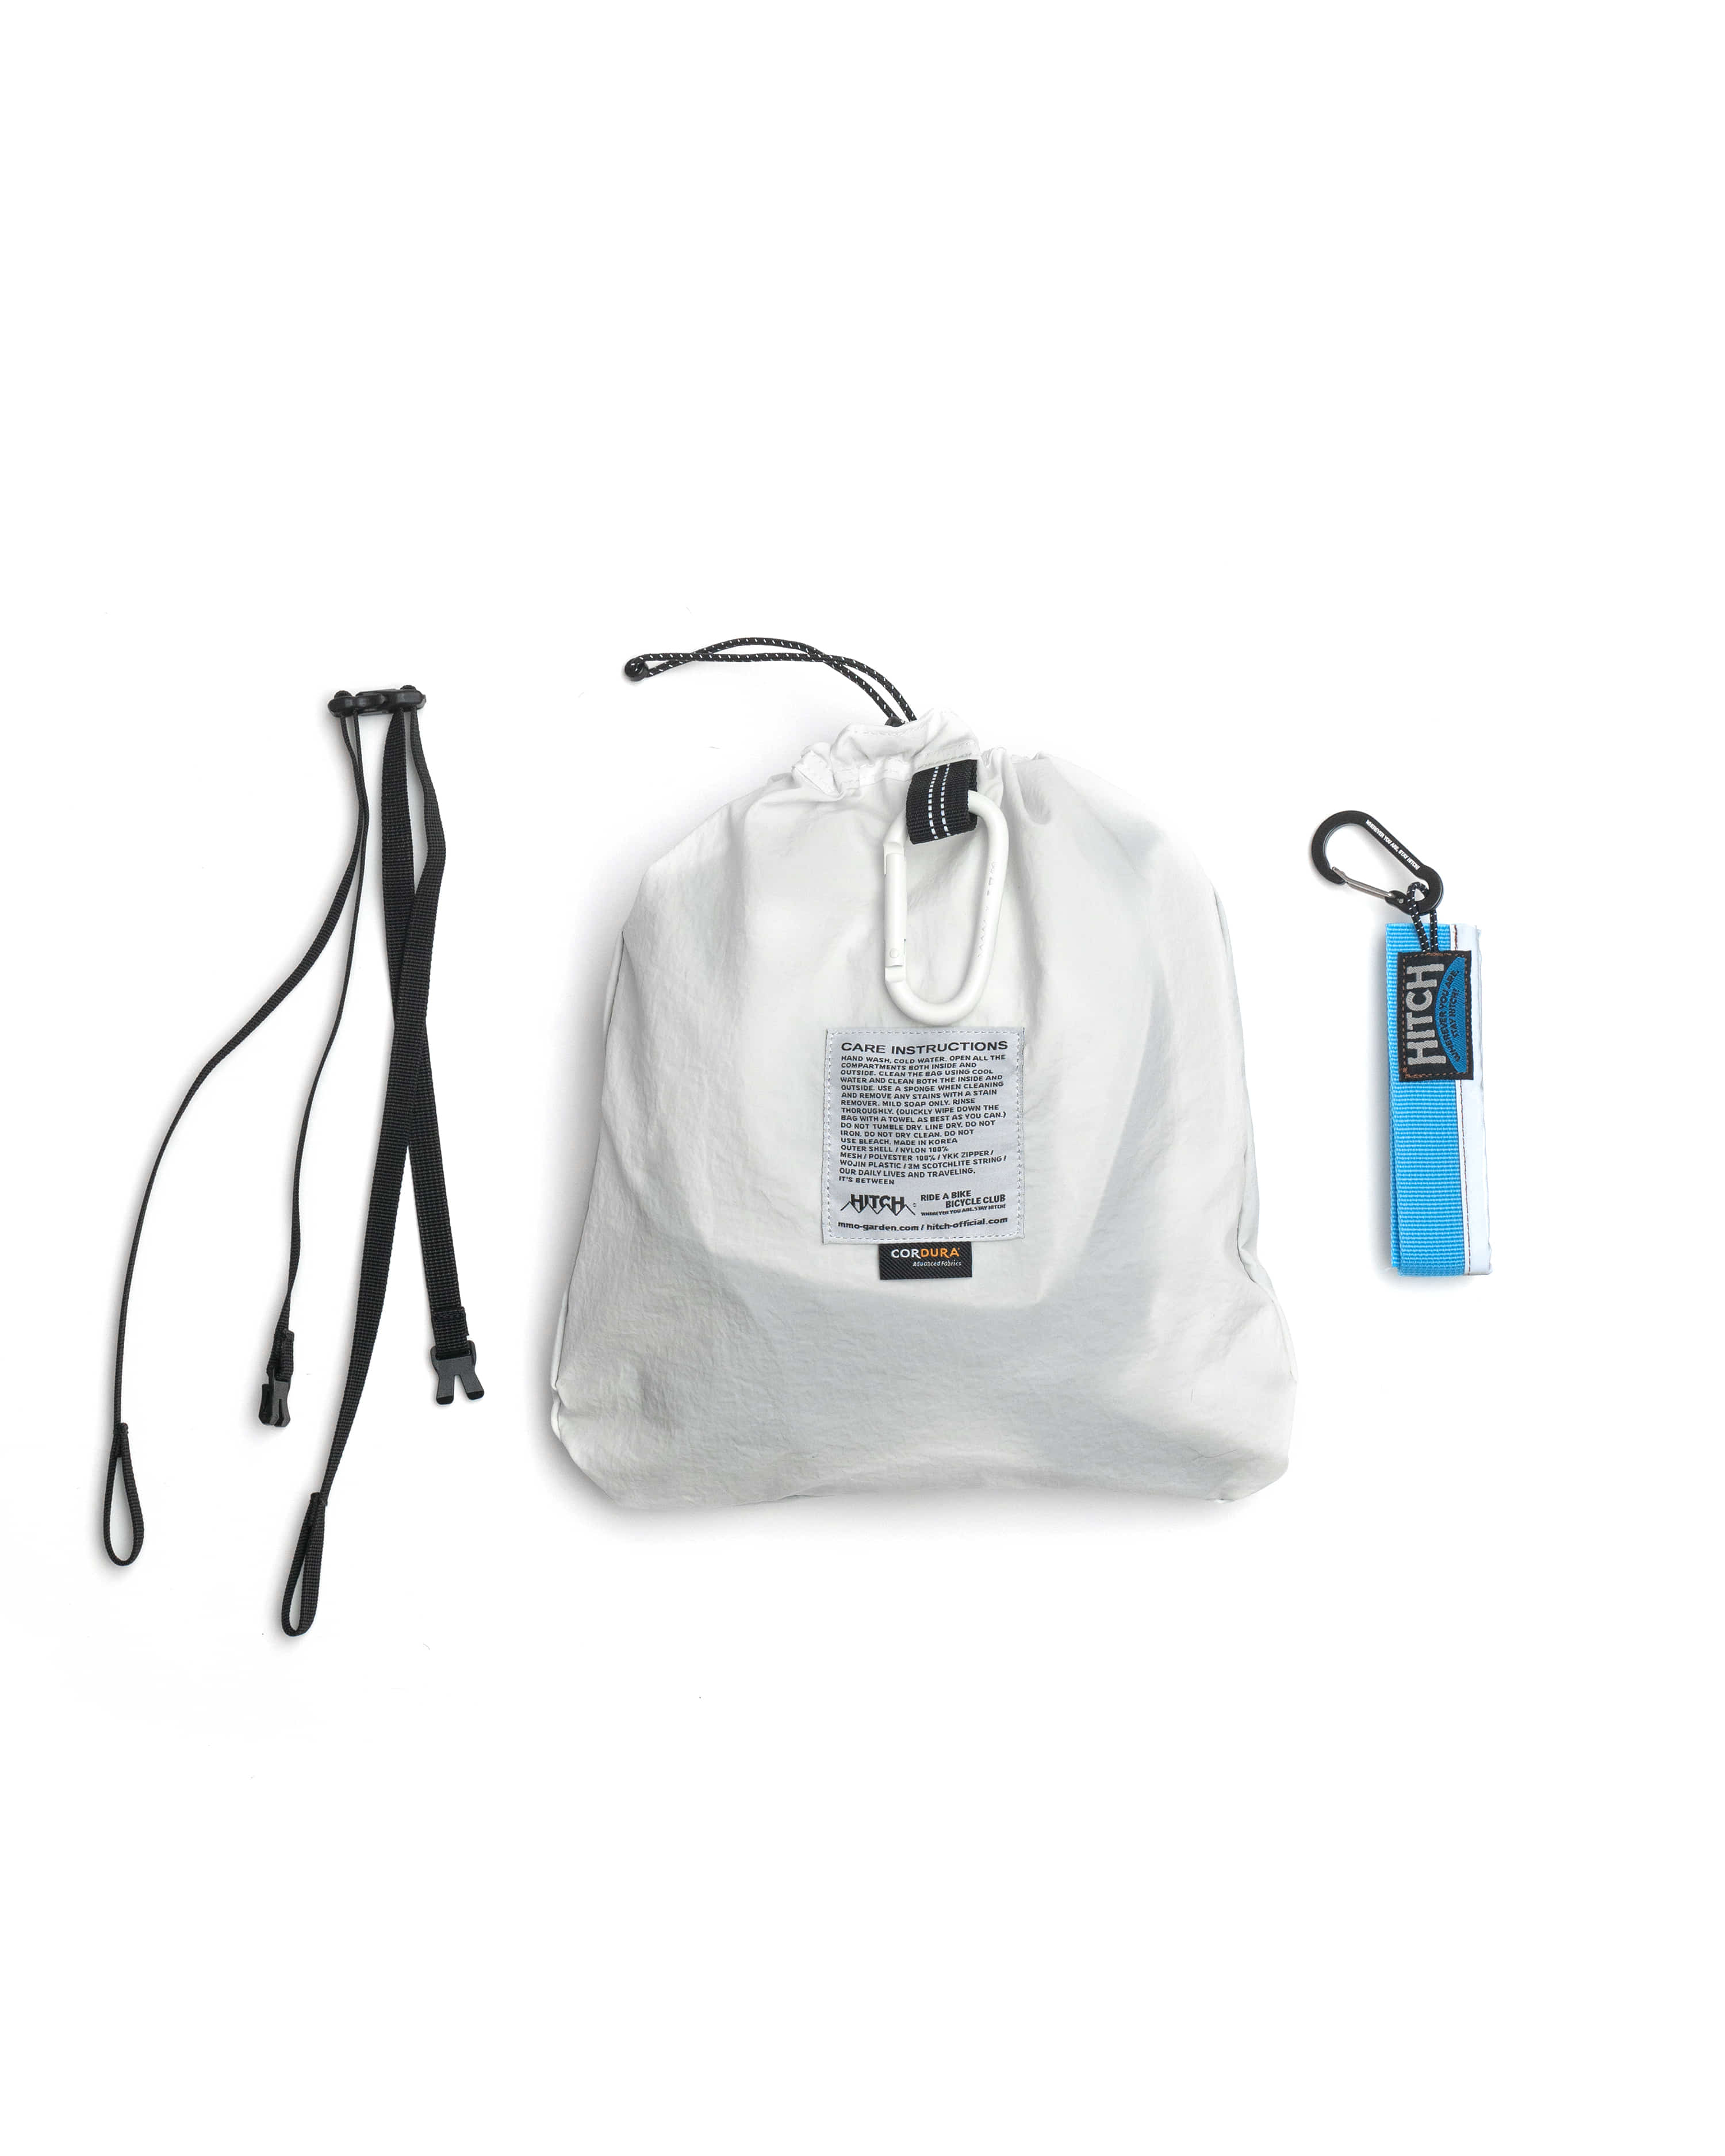 [out of stock] HITCH x mmo Backpack (085) - White